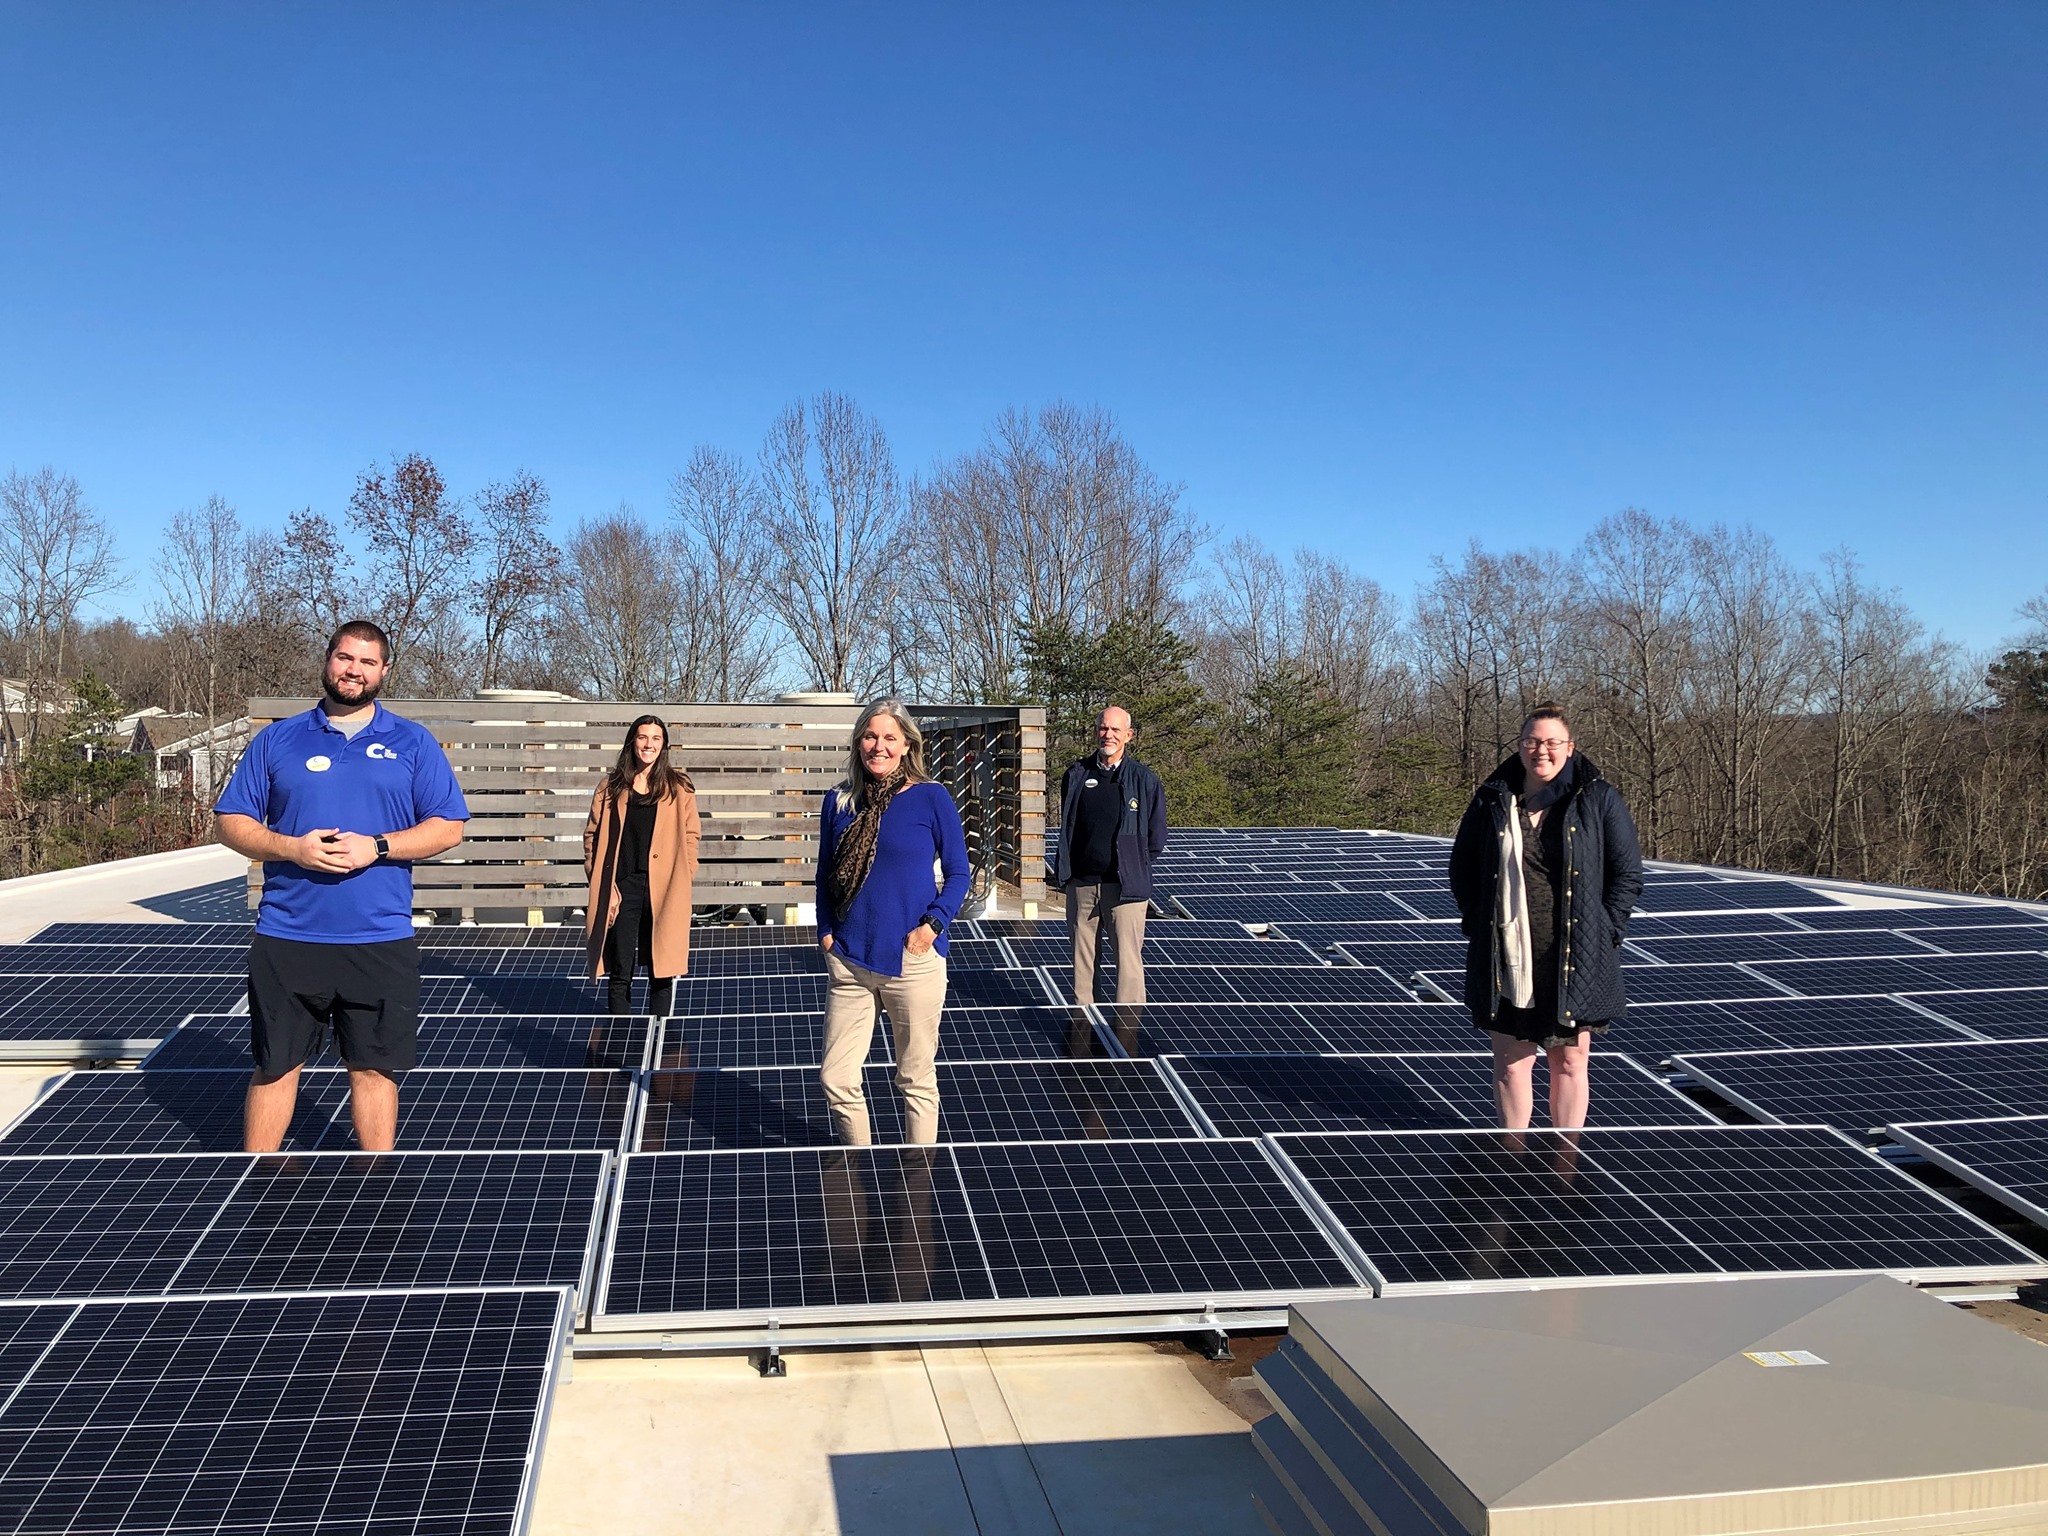 Staff of The Center at Belvedere show off their rooftop solar array.